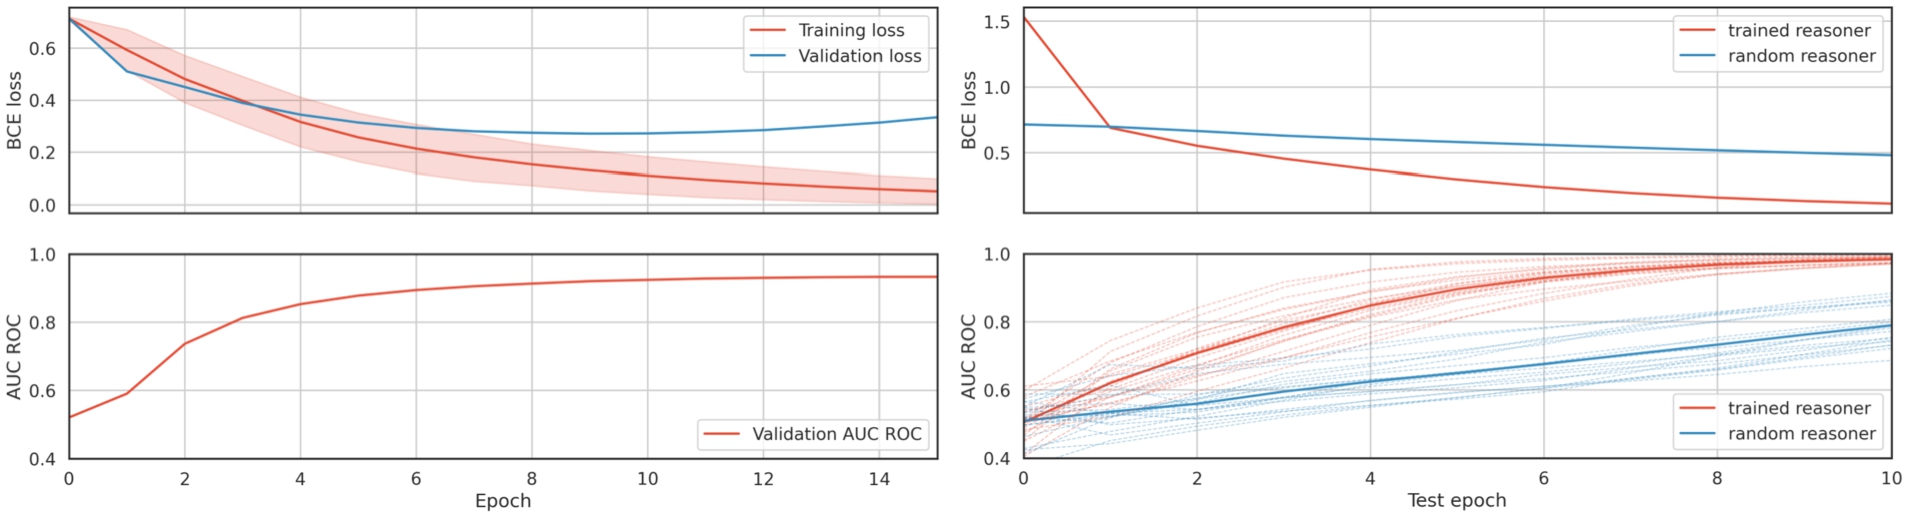 Training and test progress of the relaxed reasoner. The reported training loss for each epoch is the average mini-batch loss in that epoch. We also show the standard deviation of the mini-batch loss for each epoch. In test progress, the trained reasoner is shown in red, while the random reasoner is shown in blue. The reasoner was not trained during epoch 0 of training and testing – during epoch 0 we only compute the initial loss and metric values. Dashed lines show the AUC-ROC for each KB in the test set, while the thicker blue and red curves are the averaged AUC-ROC across KBs in the test set.